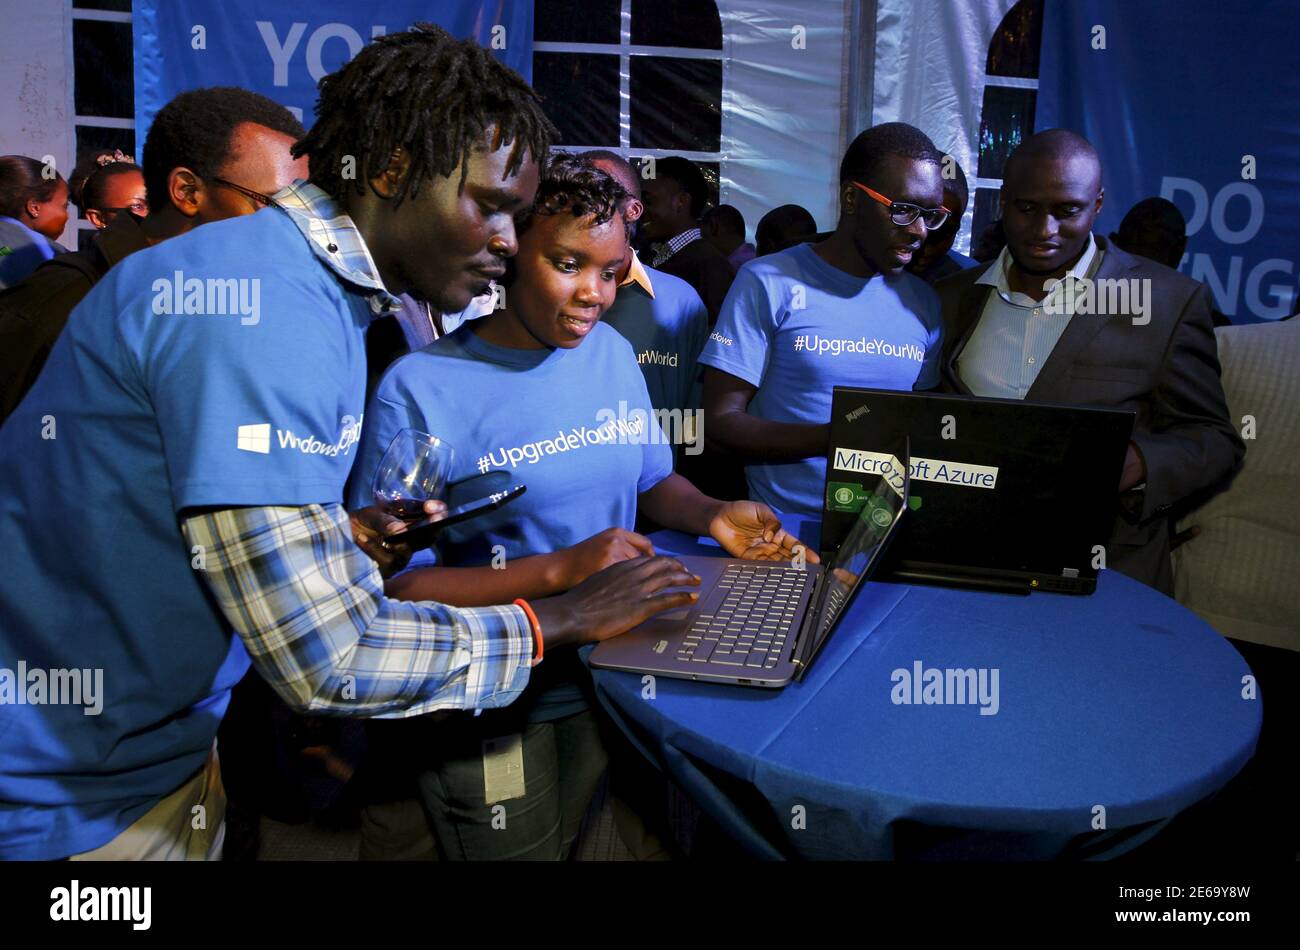 Microsoft delegates check applications in a computer during the launch of the Windows 10 operating system in Kenya's capital Nairobi, July 29, 2015. Microsoft Corp's launch of its first new operating system in almost three years, designed to work across laptops, desktop and smartphones, won mostly positive reviews for its user-friendly and feature-packed interface. REUTERS/Thomas Mukoya Stock Photo